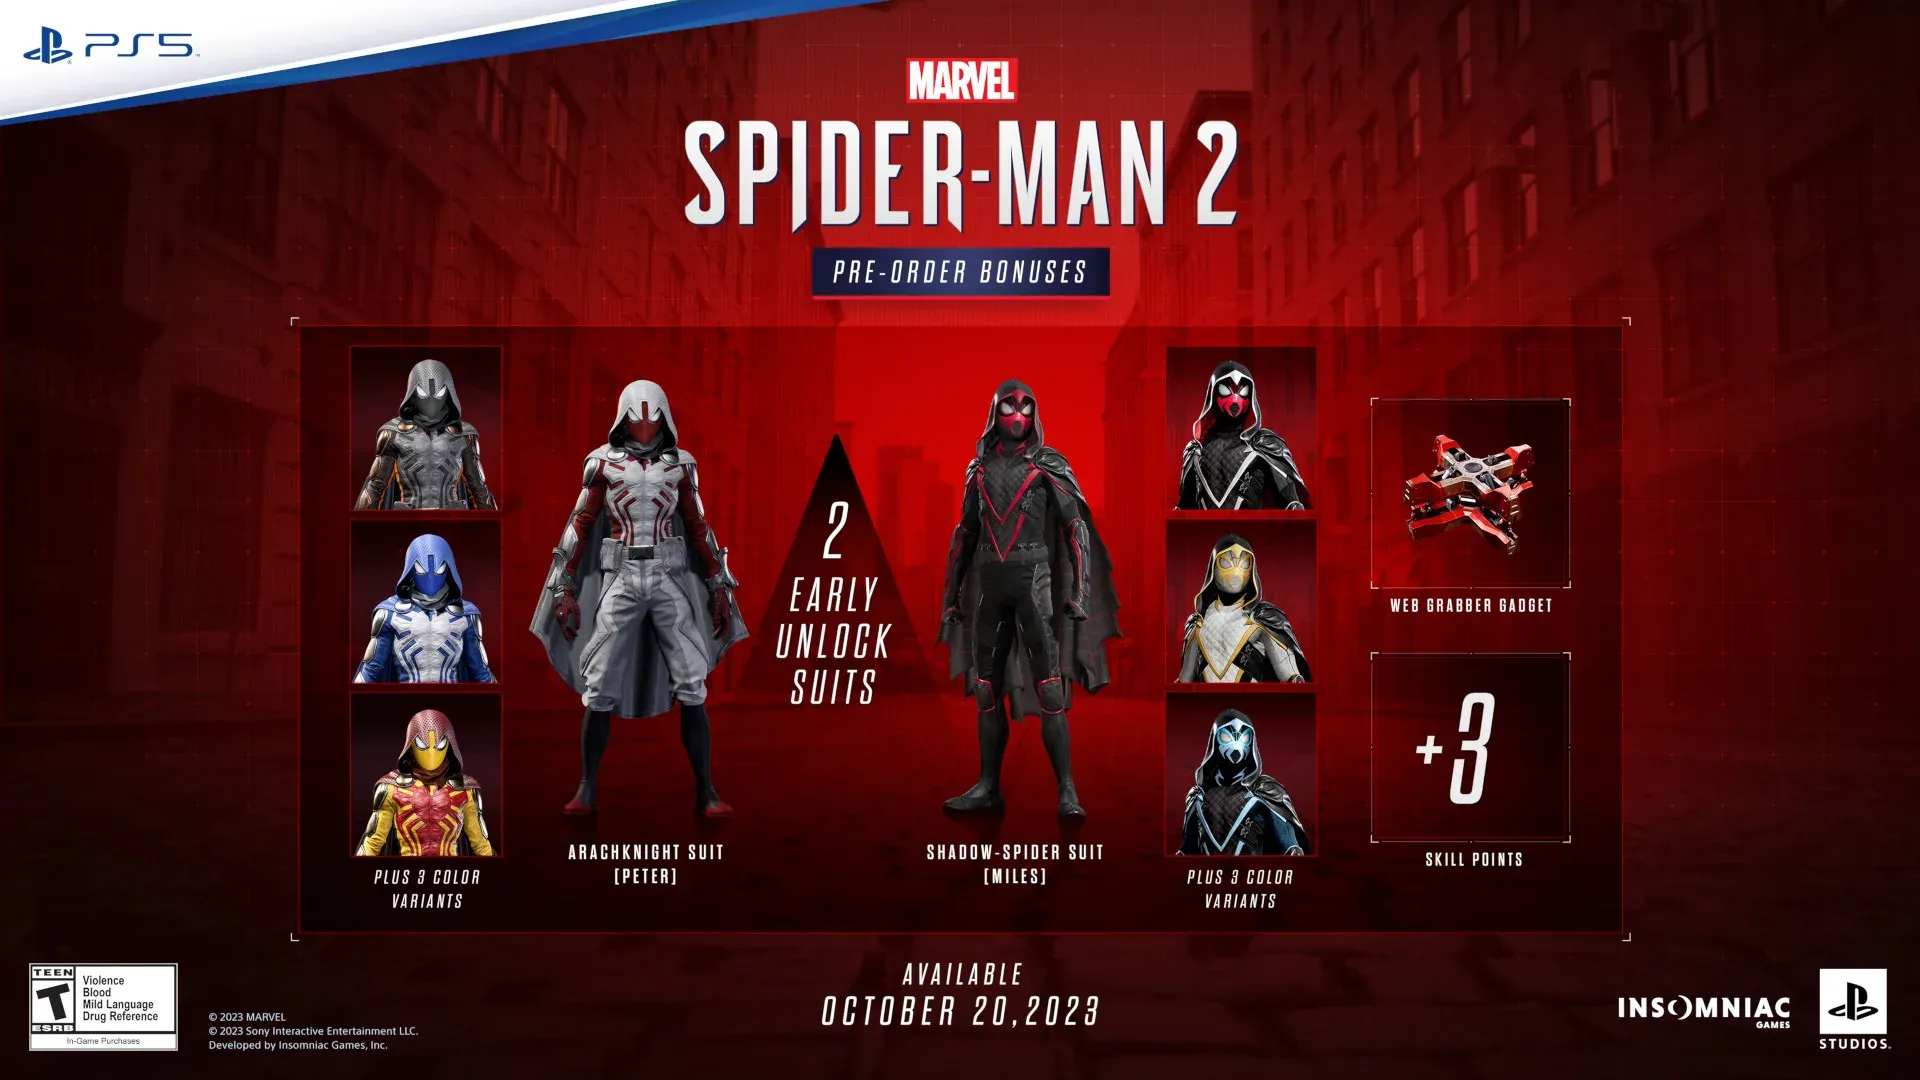 Pre-Orders For Marvel's Spider-Man 2 On PS5, Including Collector's Edition,  Live Now